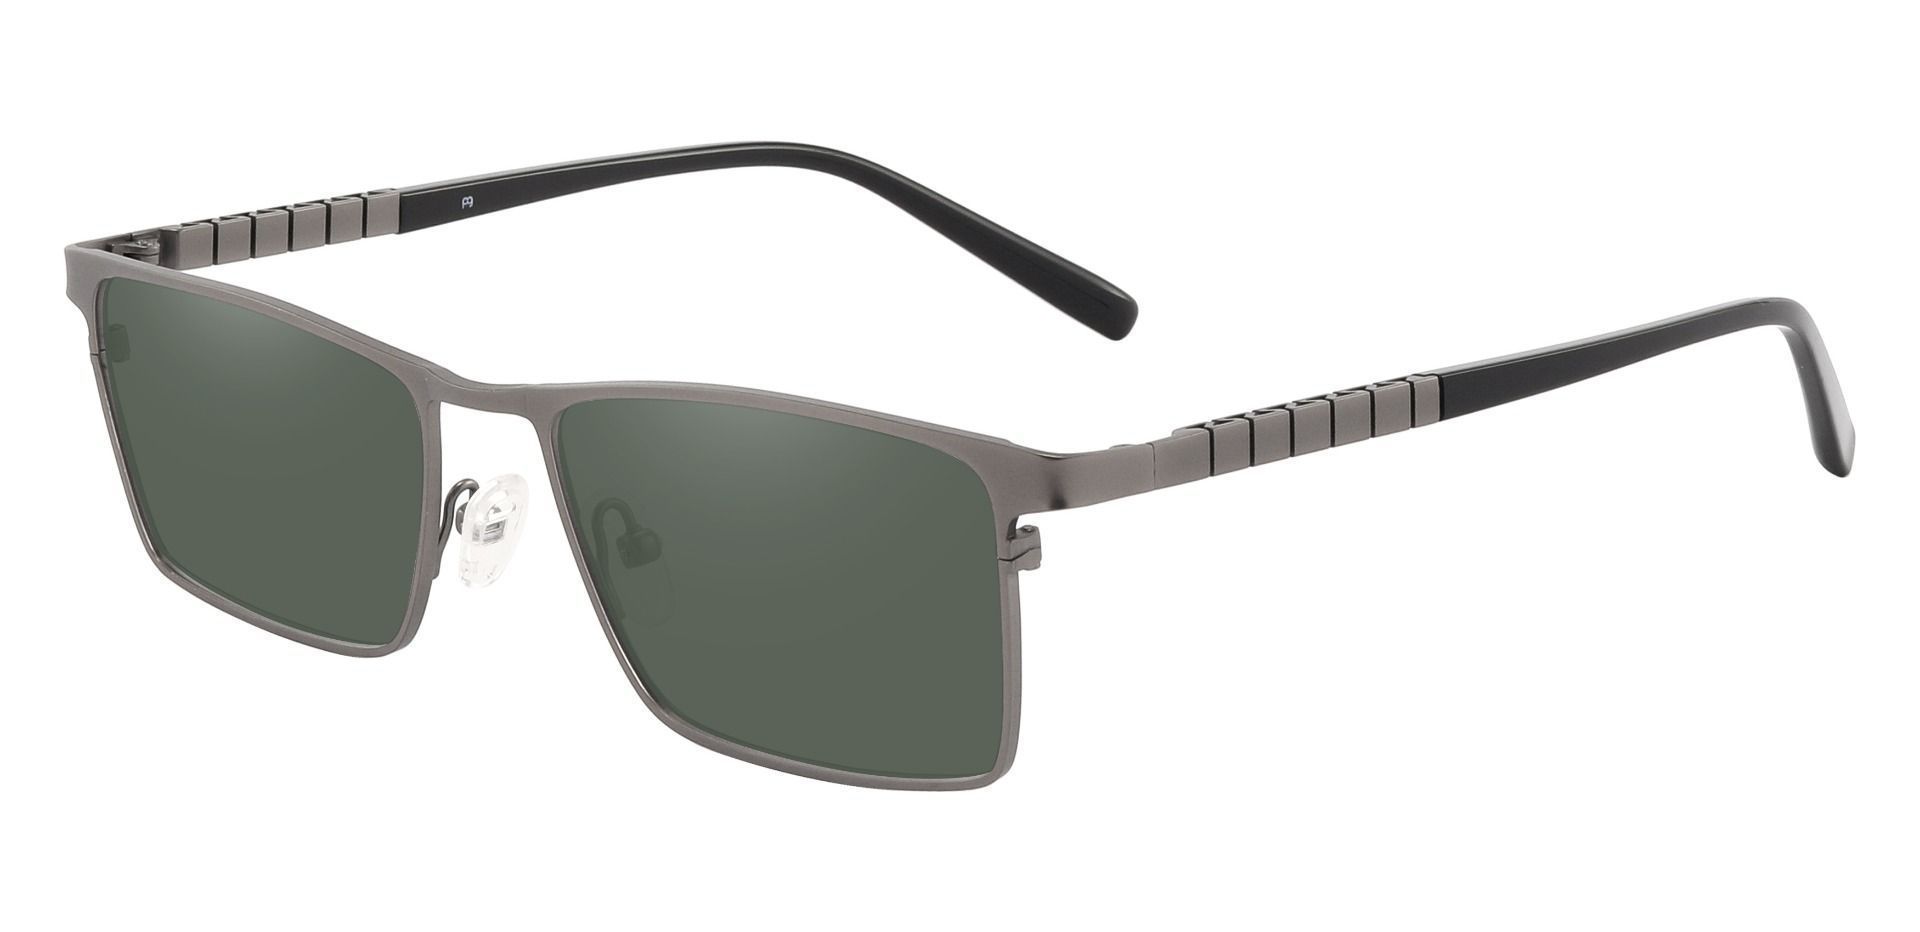 Cheshire Rectangle Non-Rx Sunglasses - Gray Frame With Green Lenses